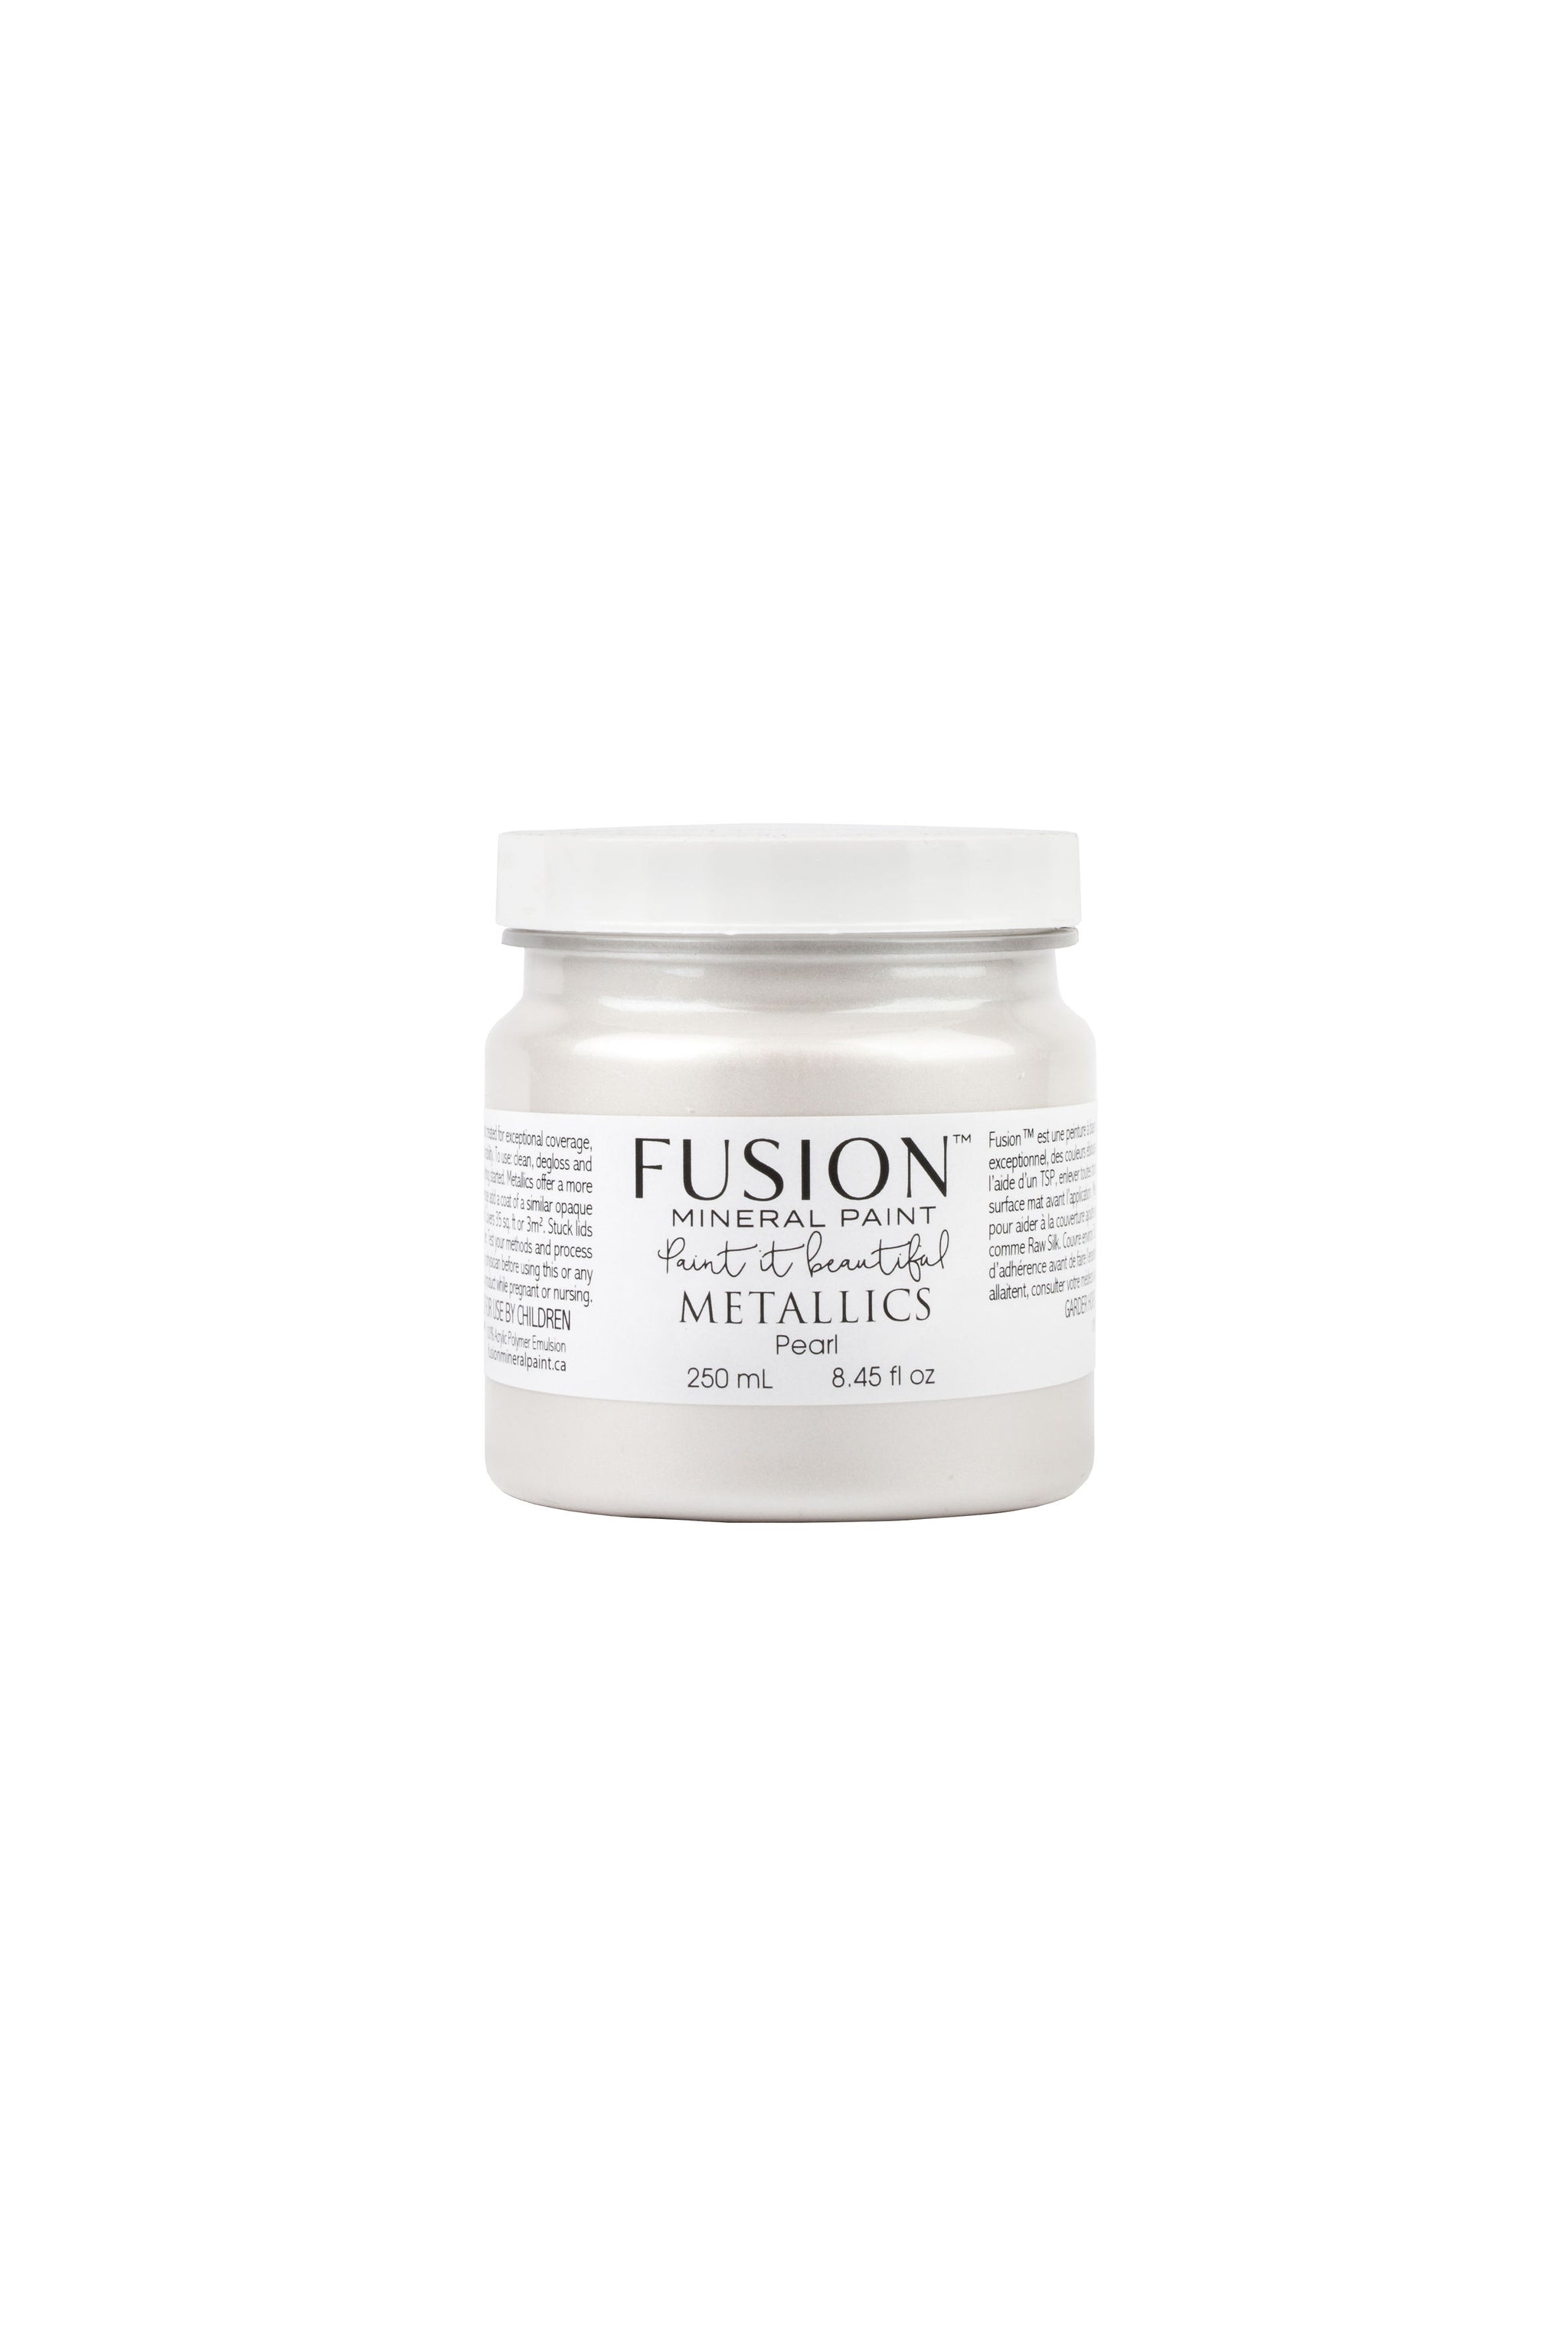 Fusion Mineral Paint Metallic Pearl